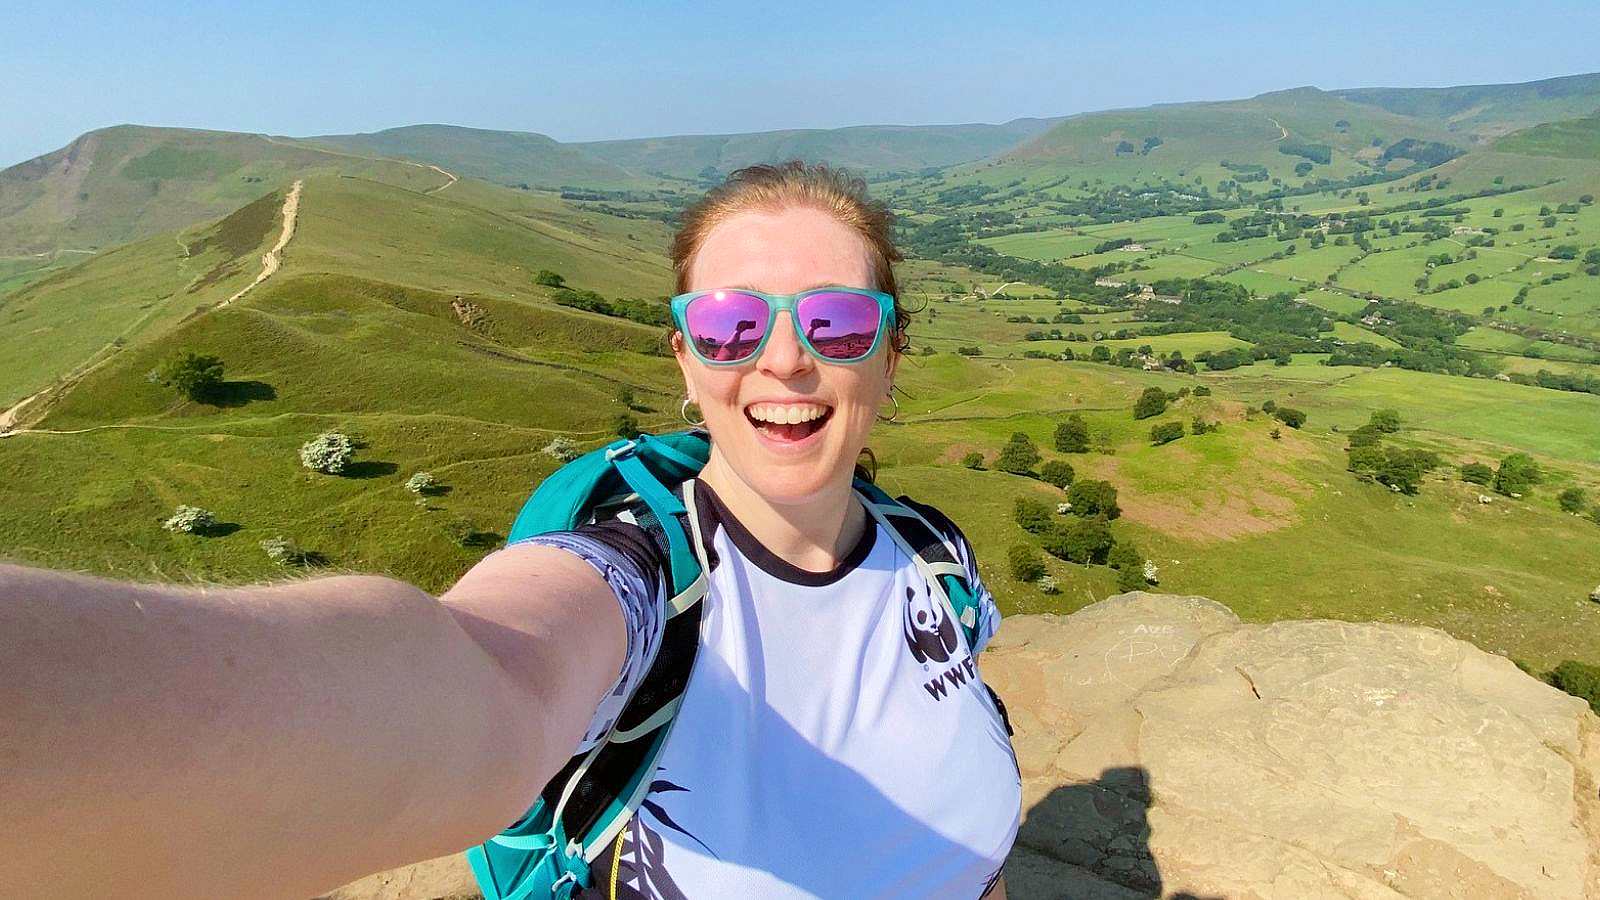 Mel smiling with the Mam Tor Circular peaks in the background from Back Tor in the Peak District on a sunny day